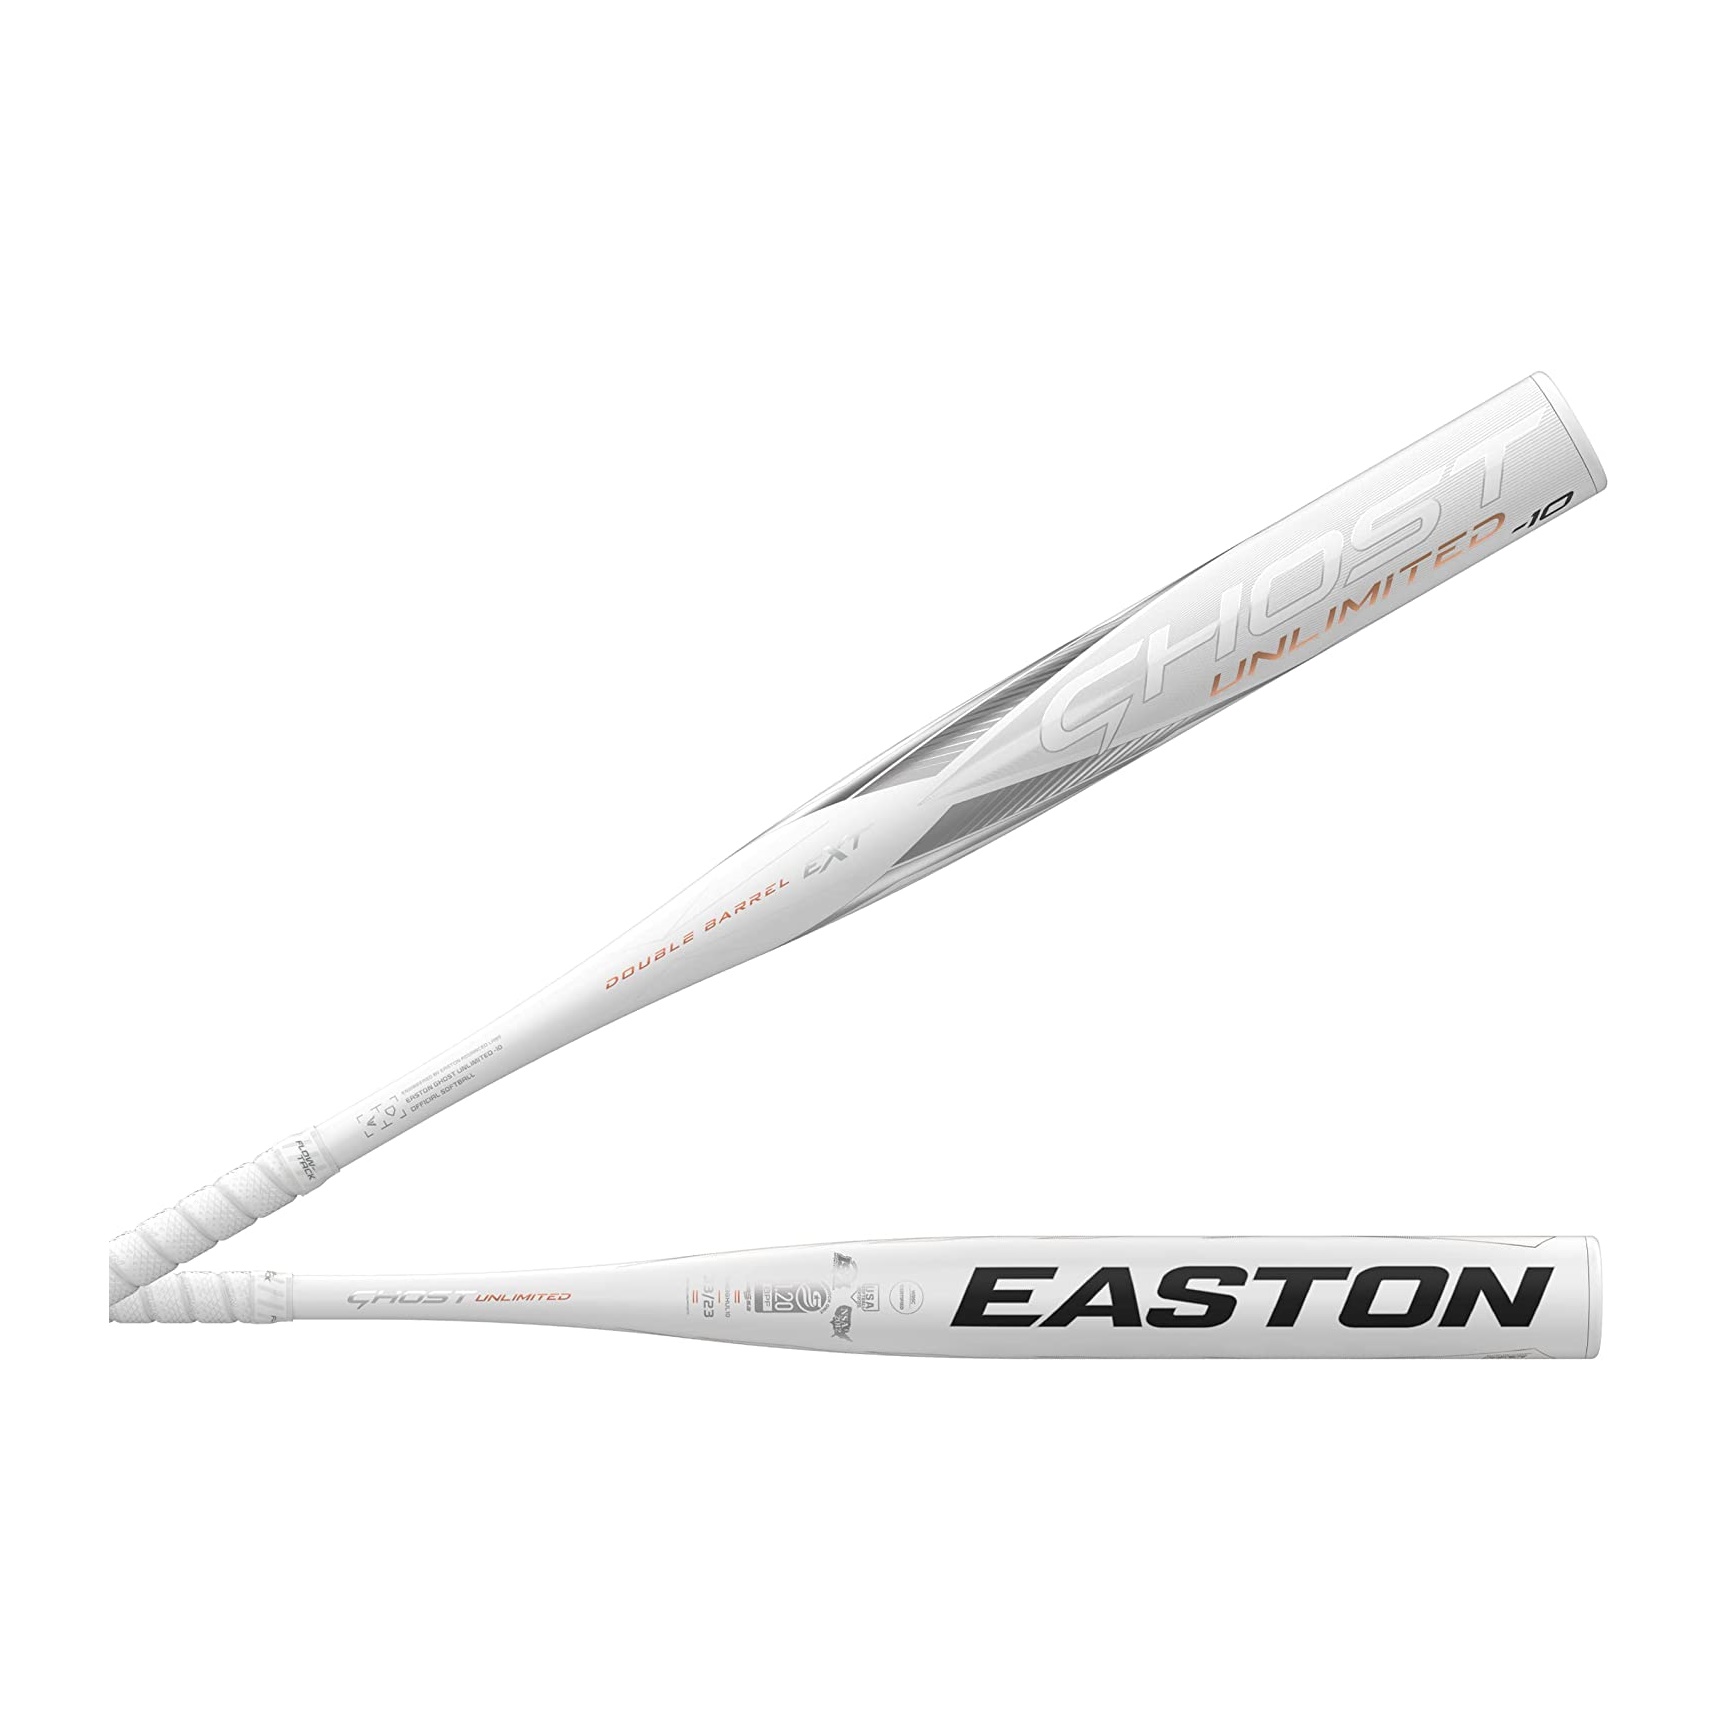 easton-ghost-unlimited-fp23ghul-11-fastpitch-softball-bat-33-inch-22-oz FP23GHUL11-3322 Easton 628412416112 Introducing the Easton Ghost Unlimited Fastpitch Softball Bat a true game-changer